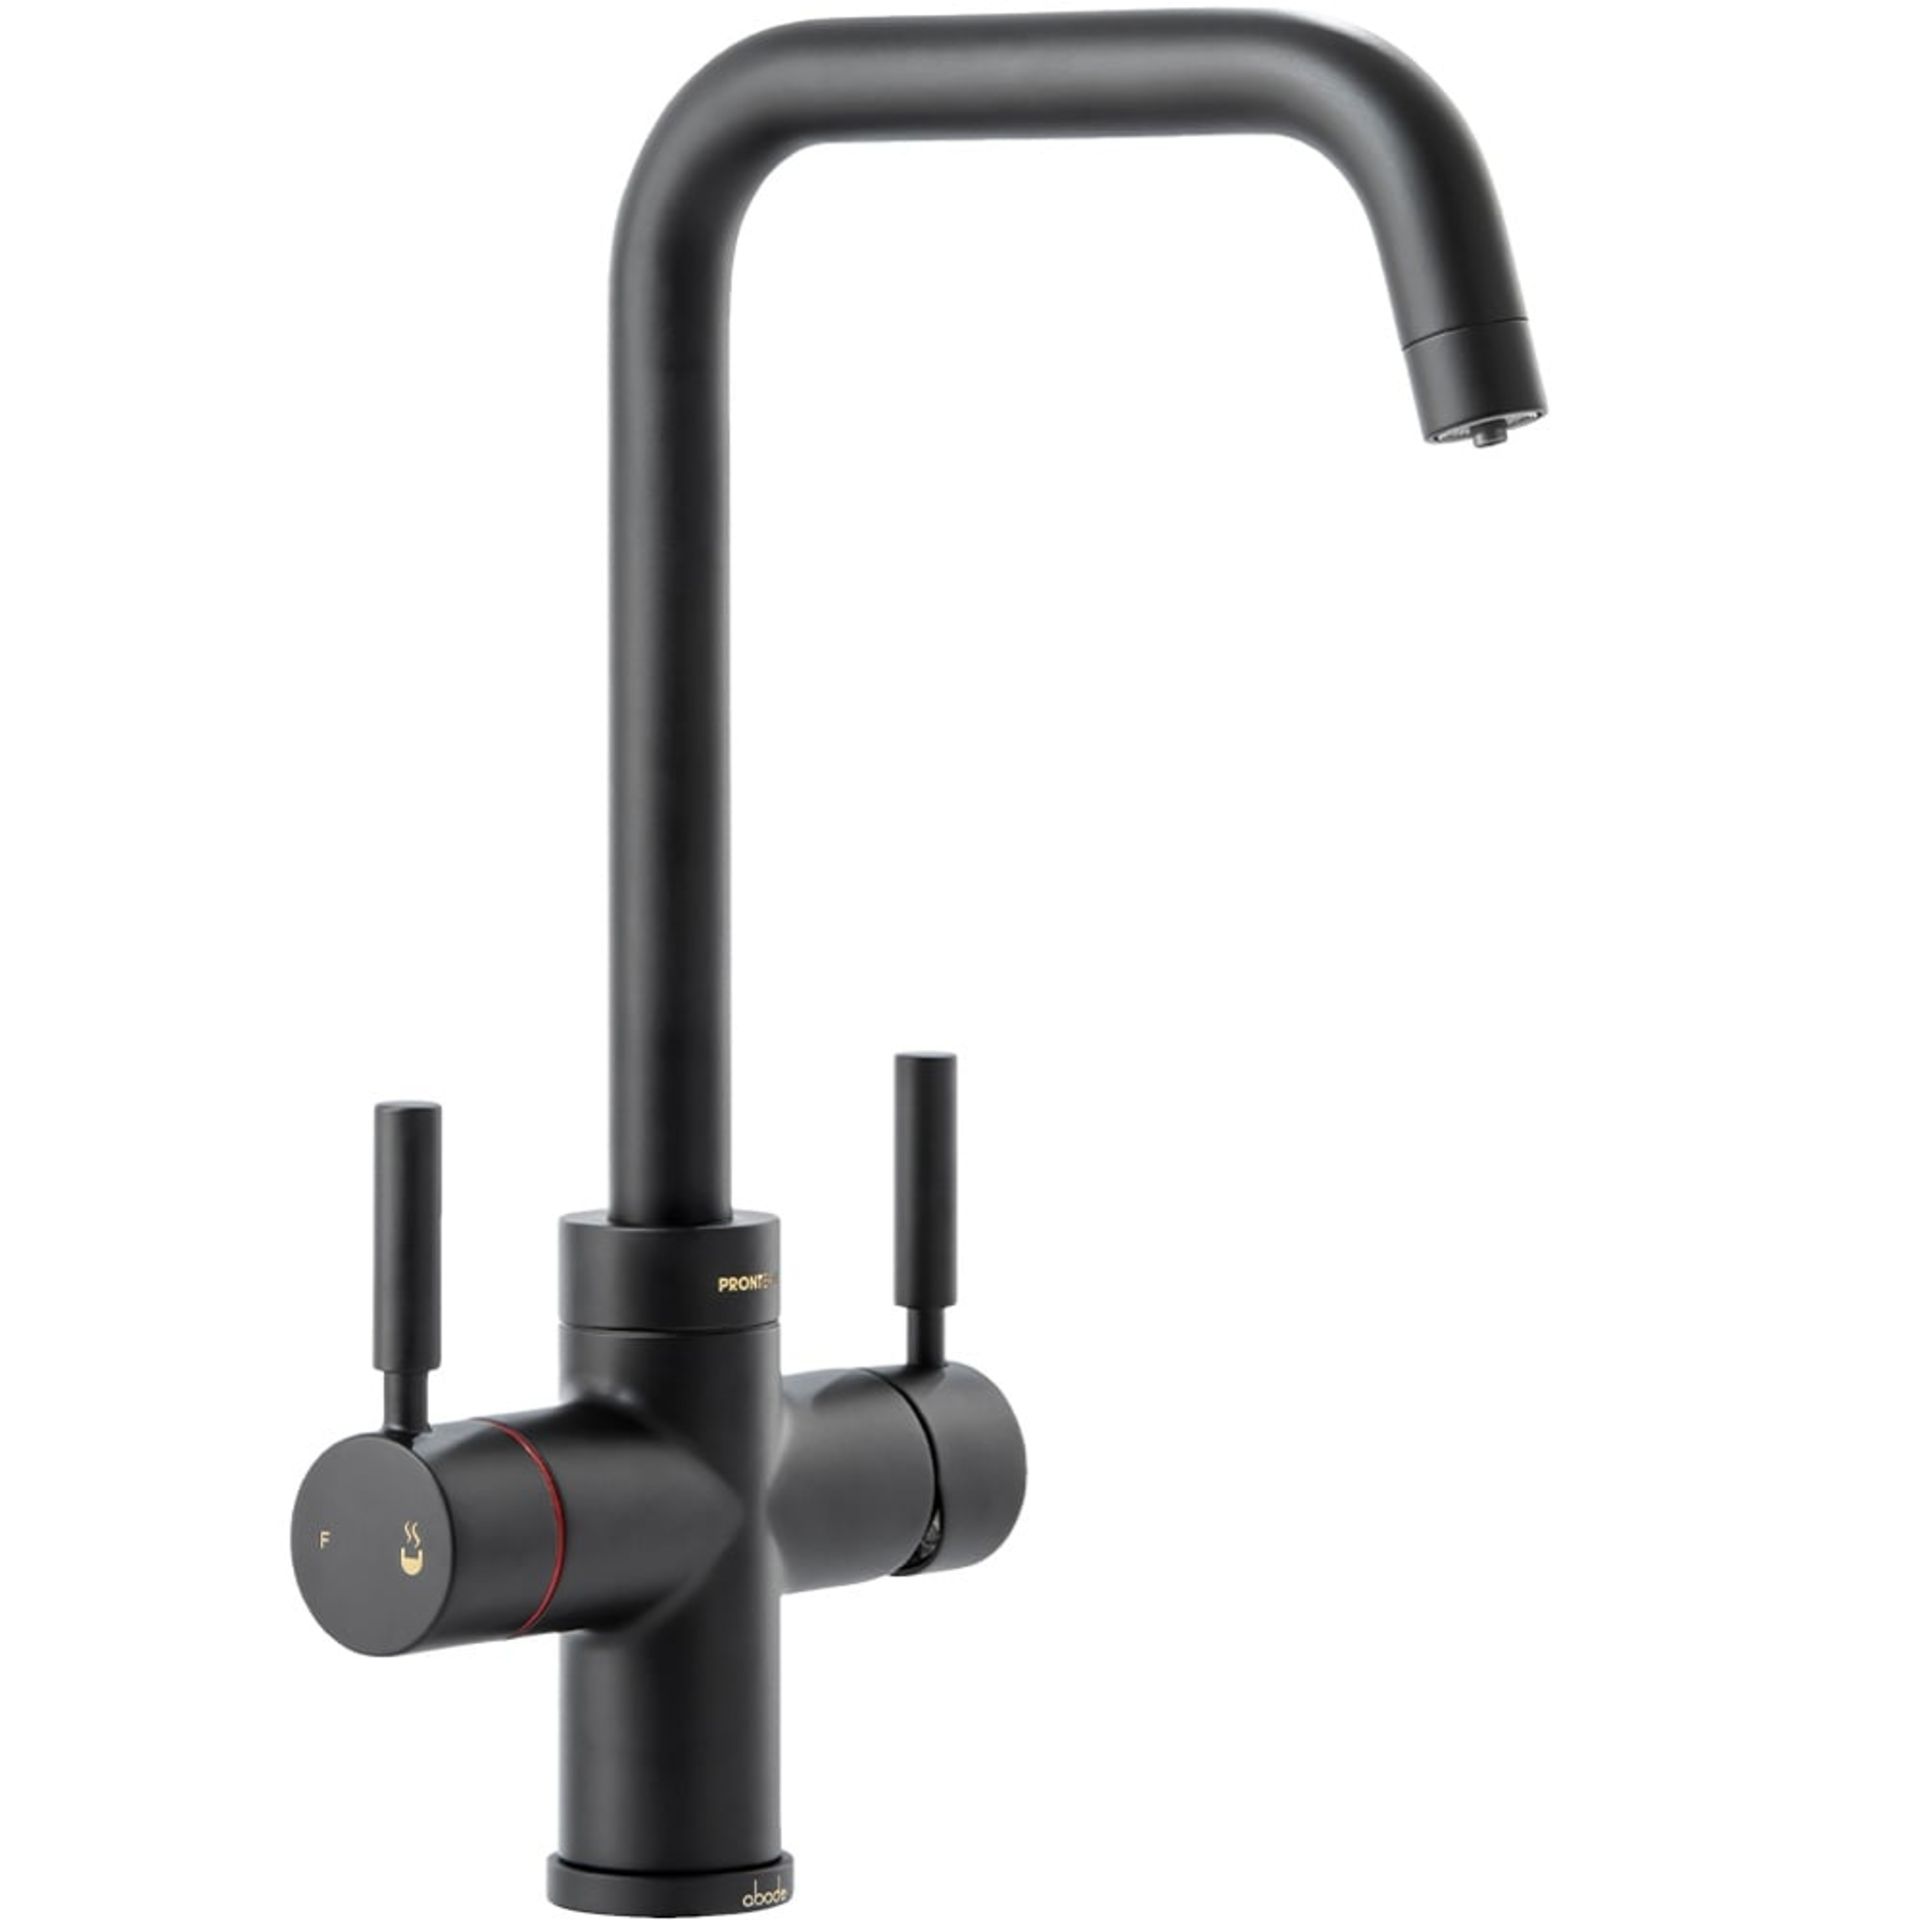 NEW (F156) Abode Propure Matt Black 4in1 Boiling Hot Water Quad Spout Kitchen Sink Tap. RRP £9... - Image 2 of 2